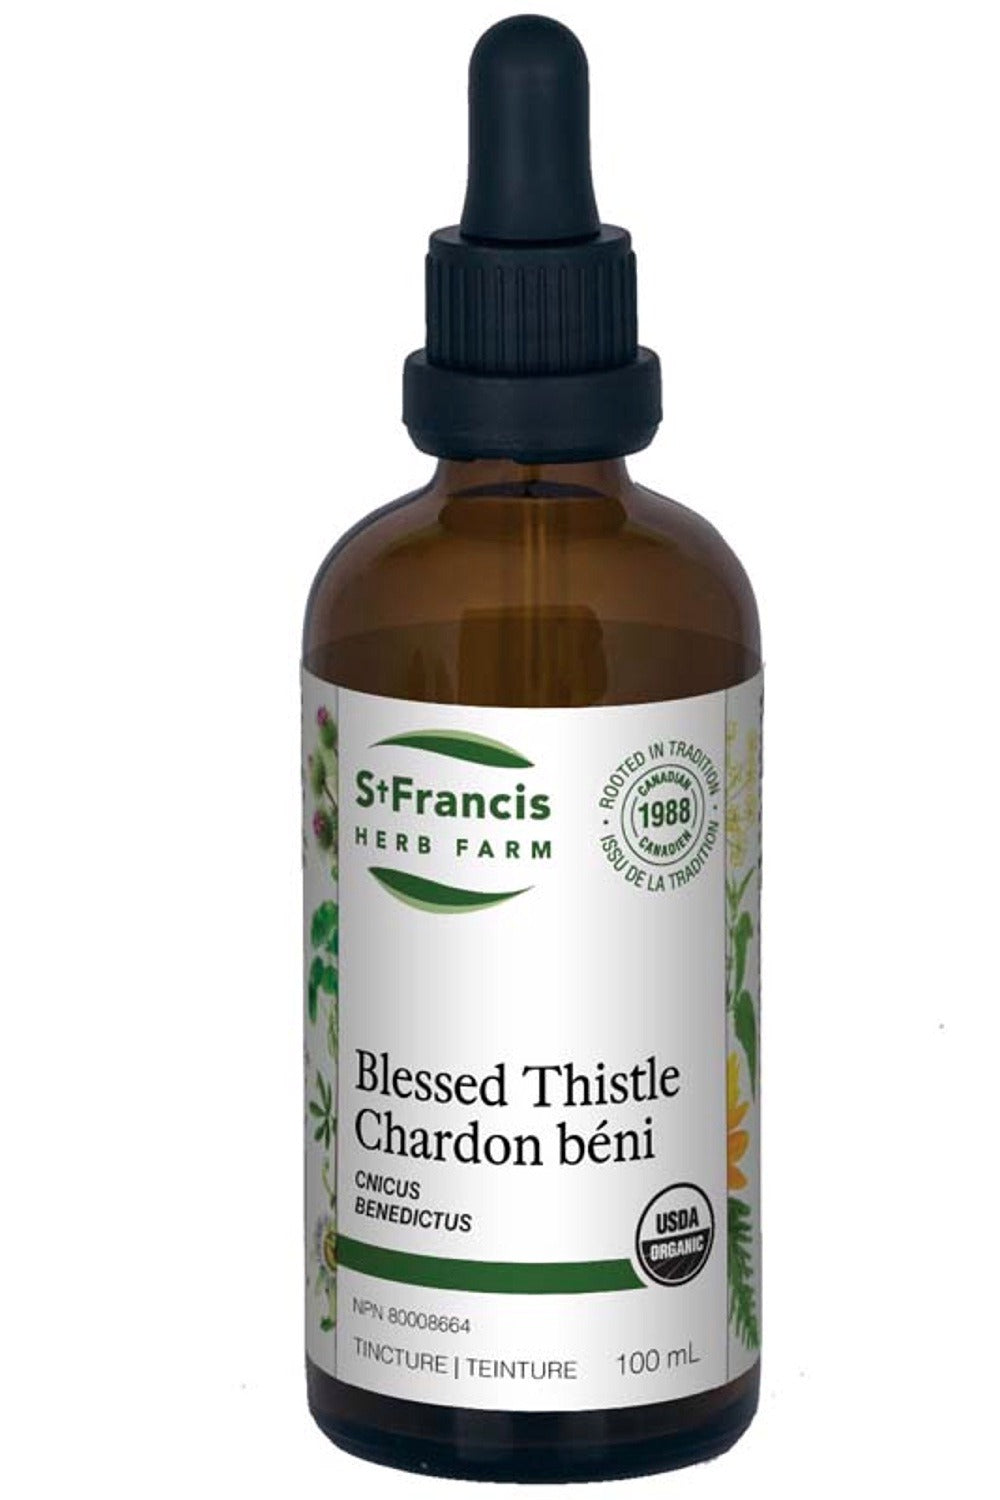 ST FRANCIS HERB FARM Blessed Thistle (100 ml)